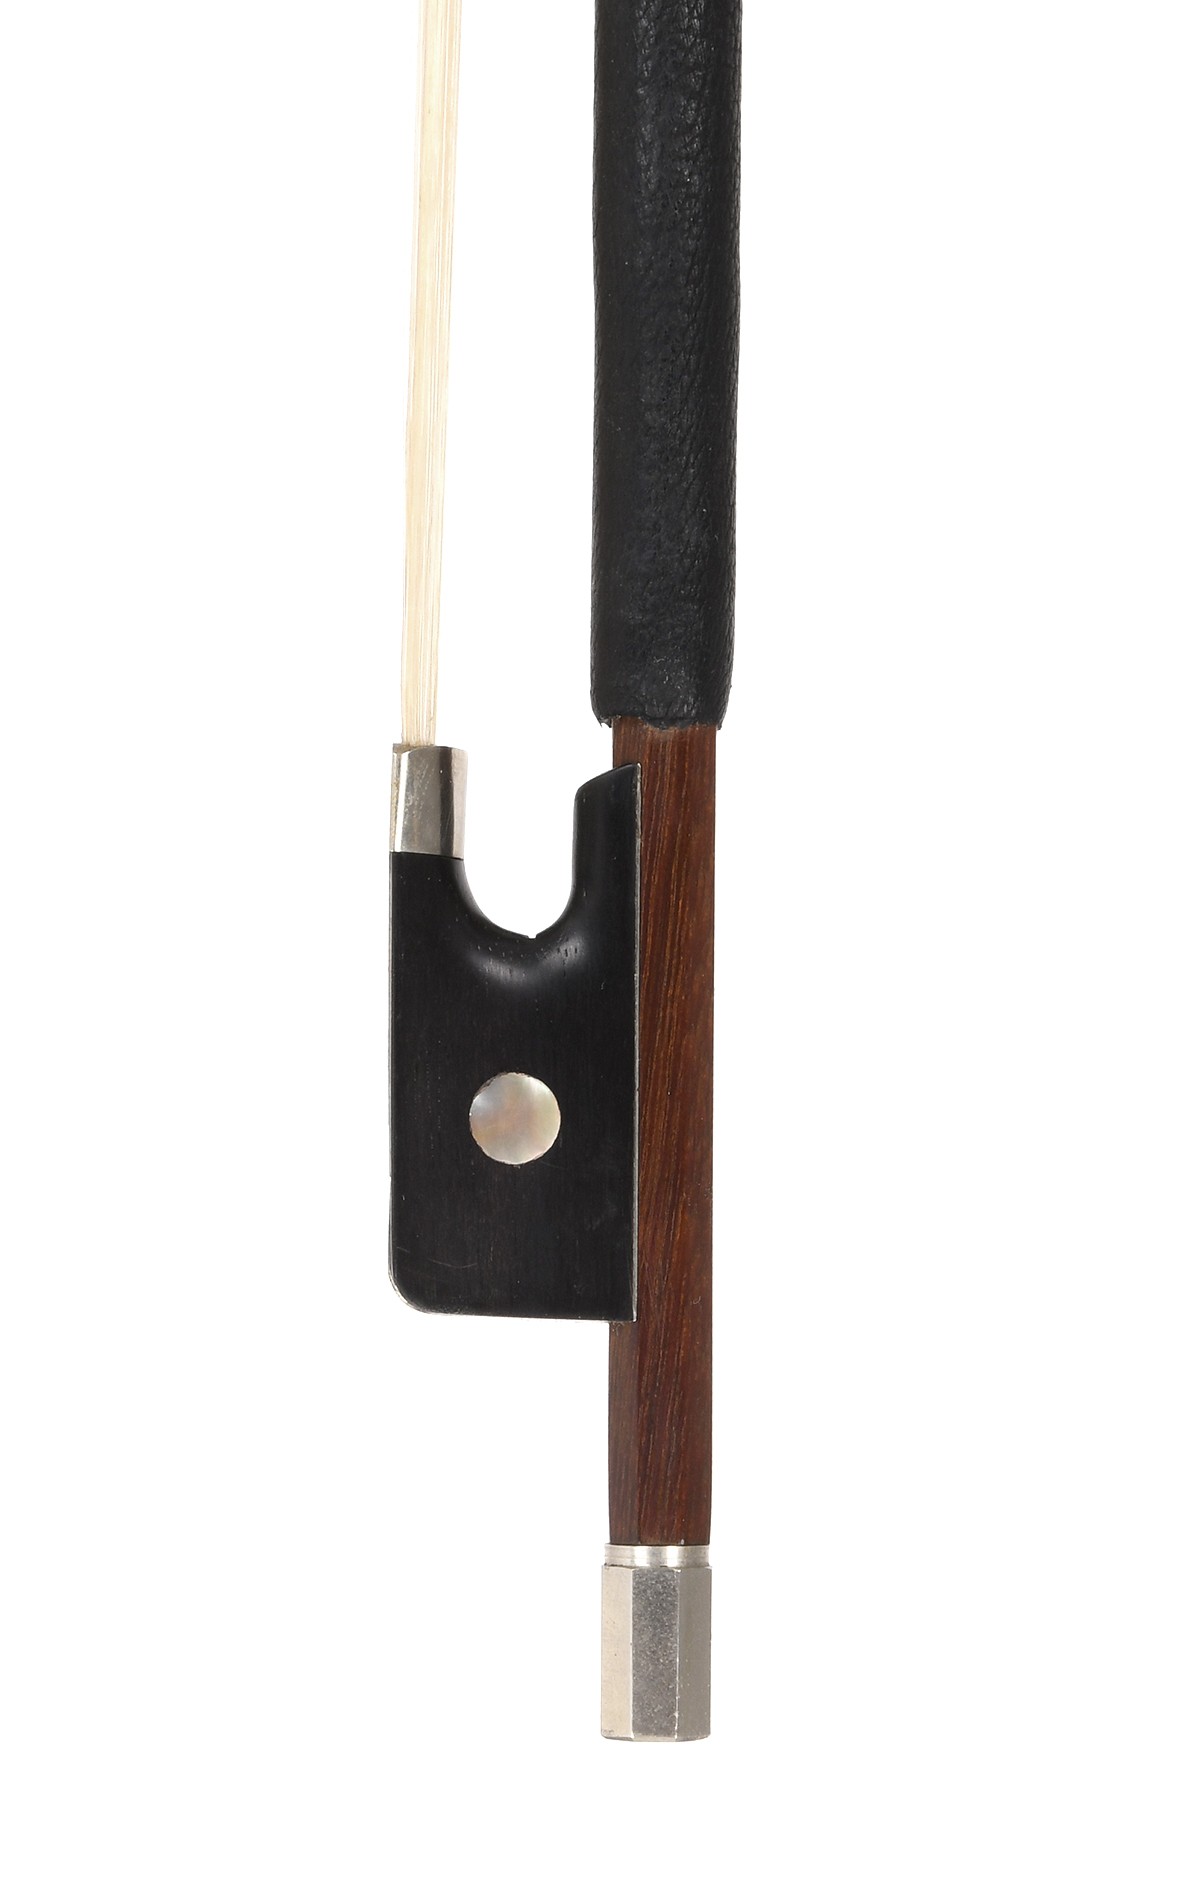 François Lotte: French violin bow around 1920